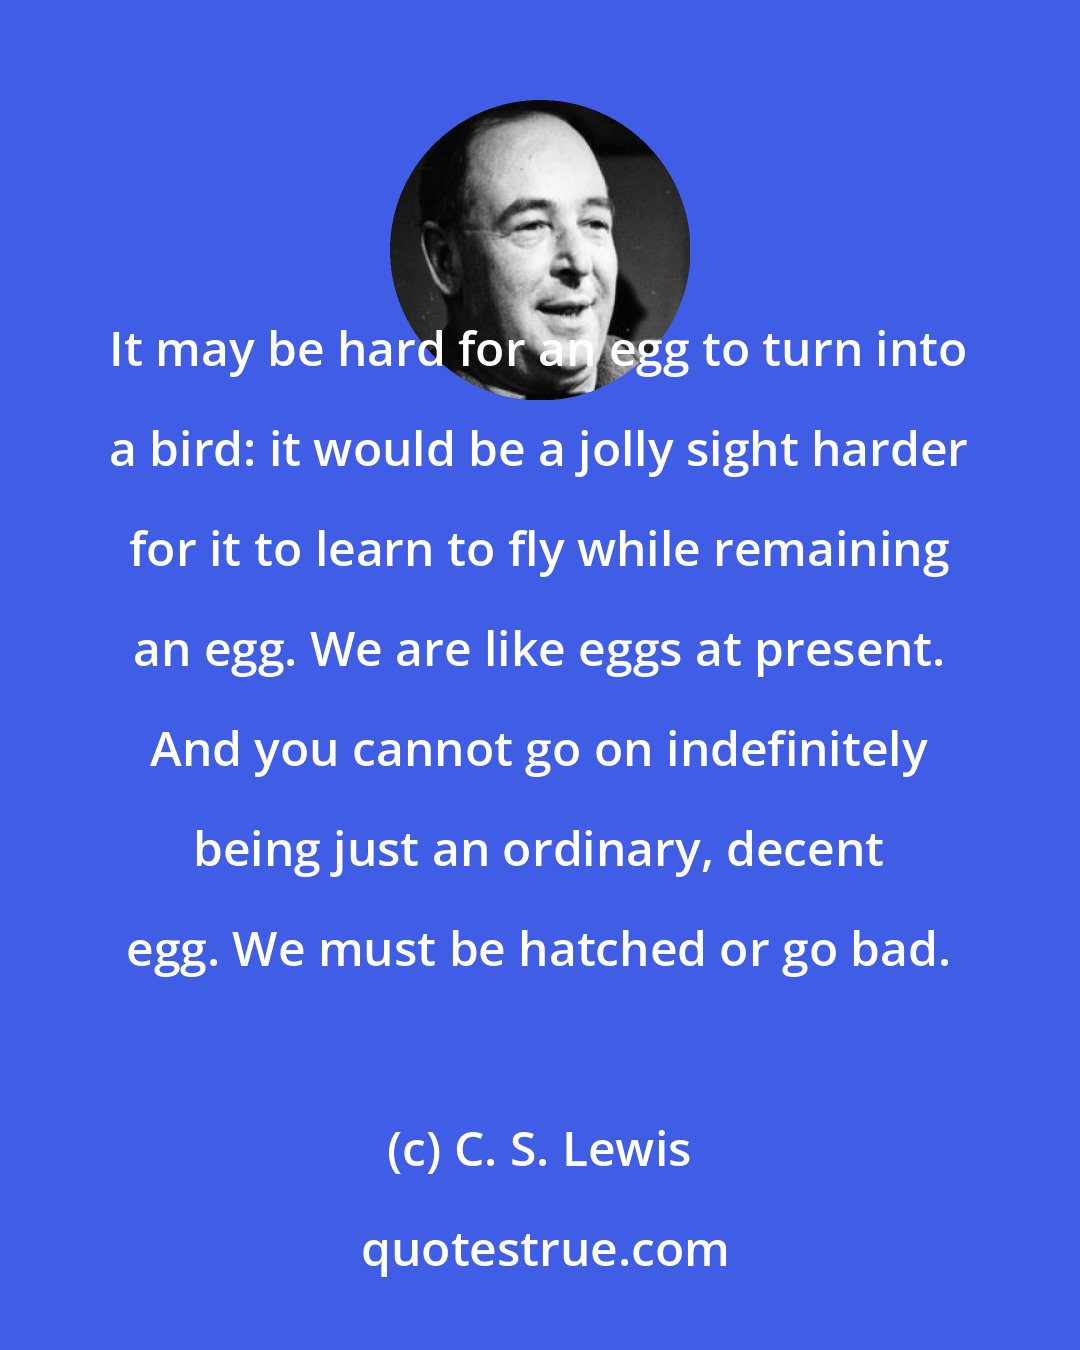 C. S. Lewis: It may be hard for an egg to turn into a bird: it would be a jolly sight harder for it to learn to fly while remaining an egg. We are like eggs at present. And you cannot go on indefinitely being just an ordinary, decent egg. We must be hatched or go bad.